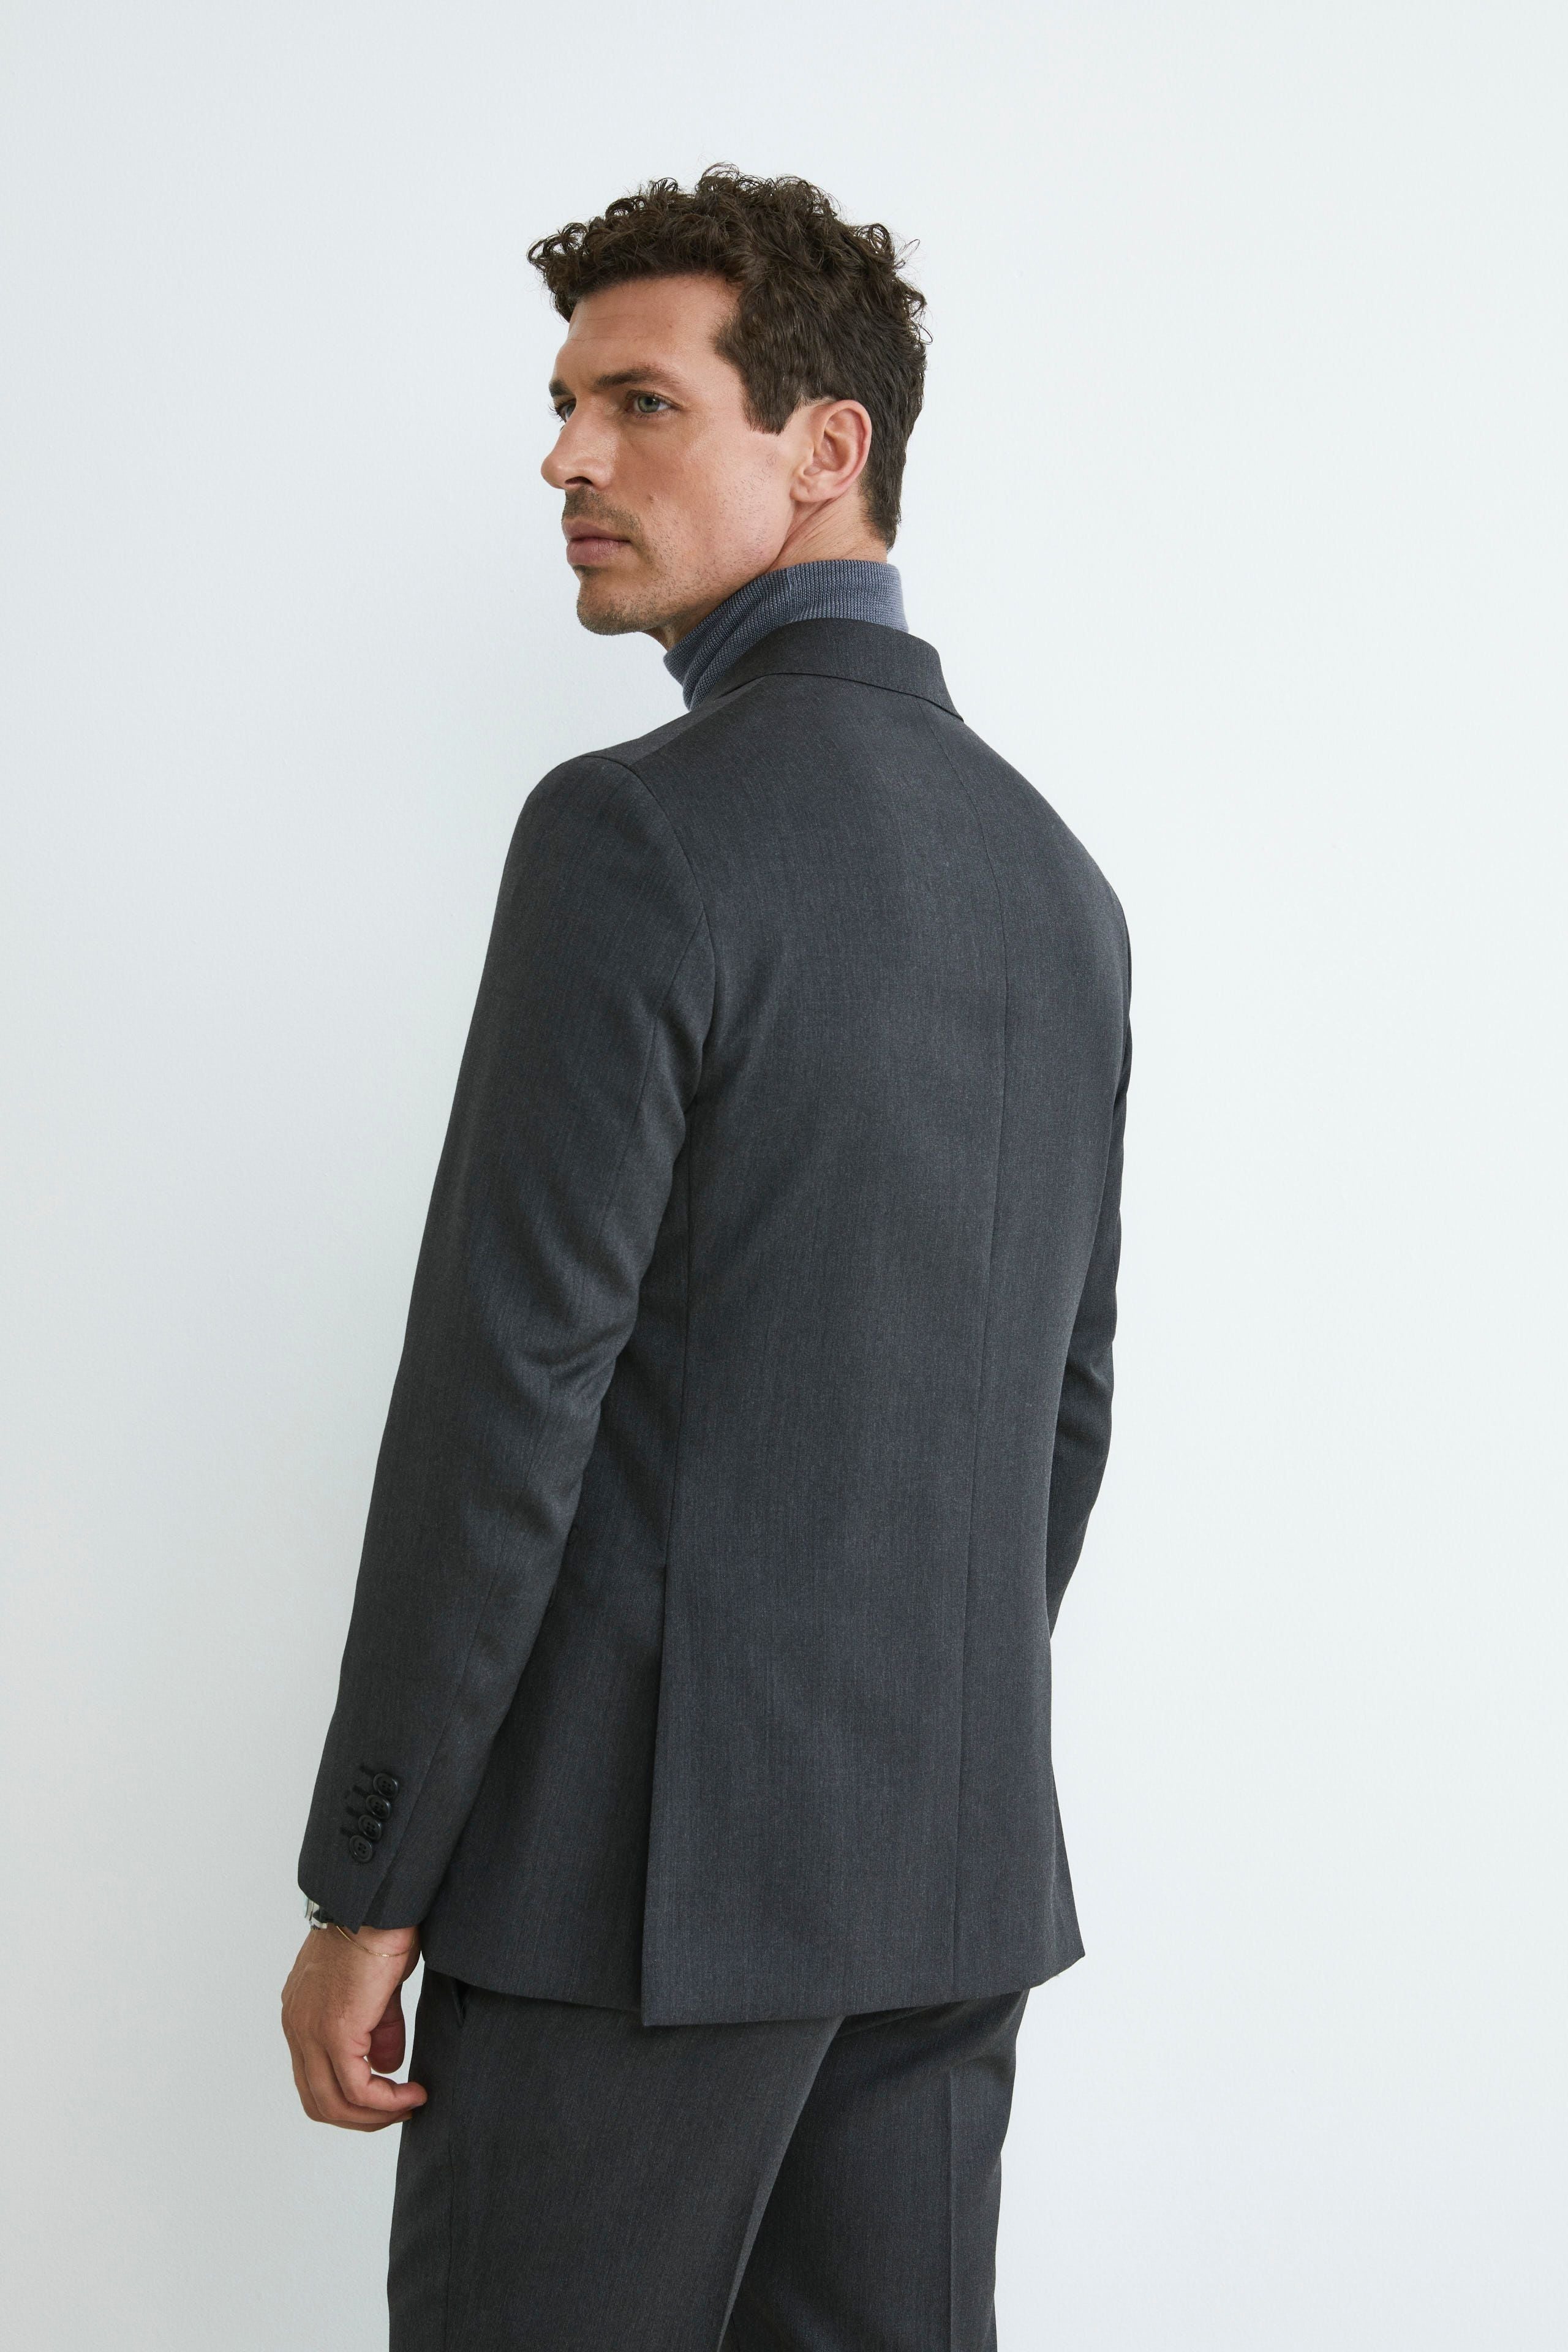 Anthracite wool Suit - Charcoal grey